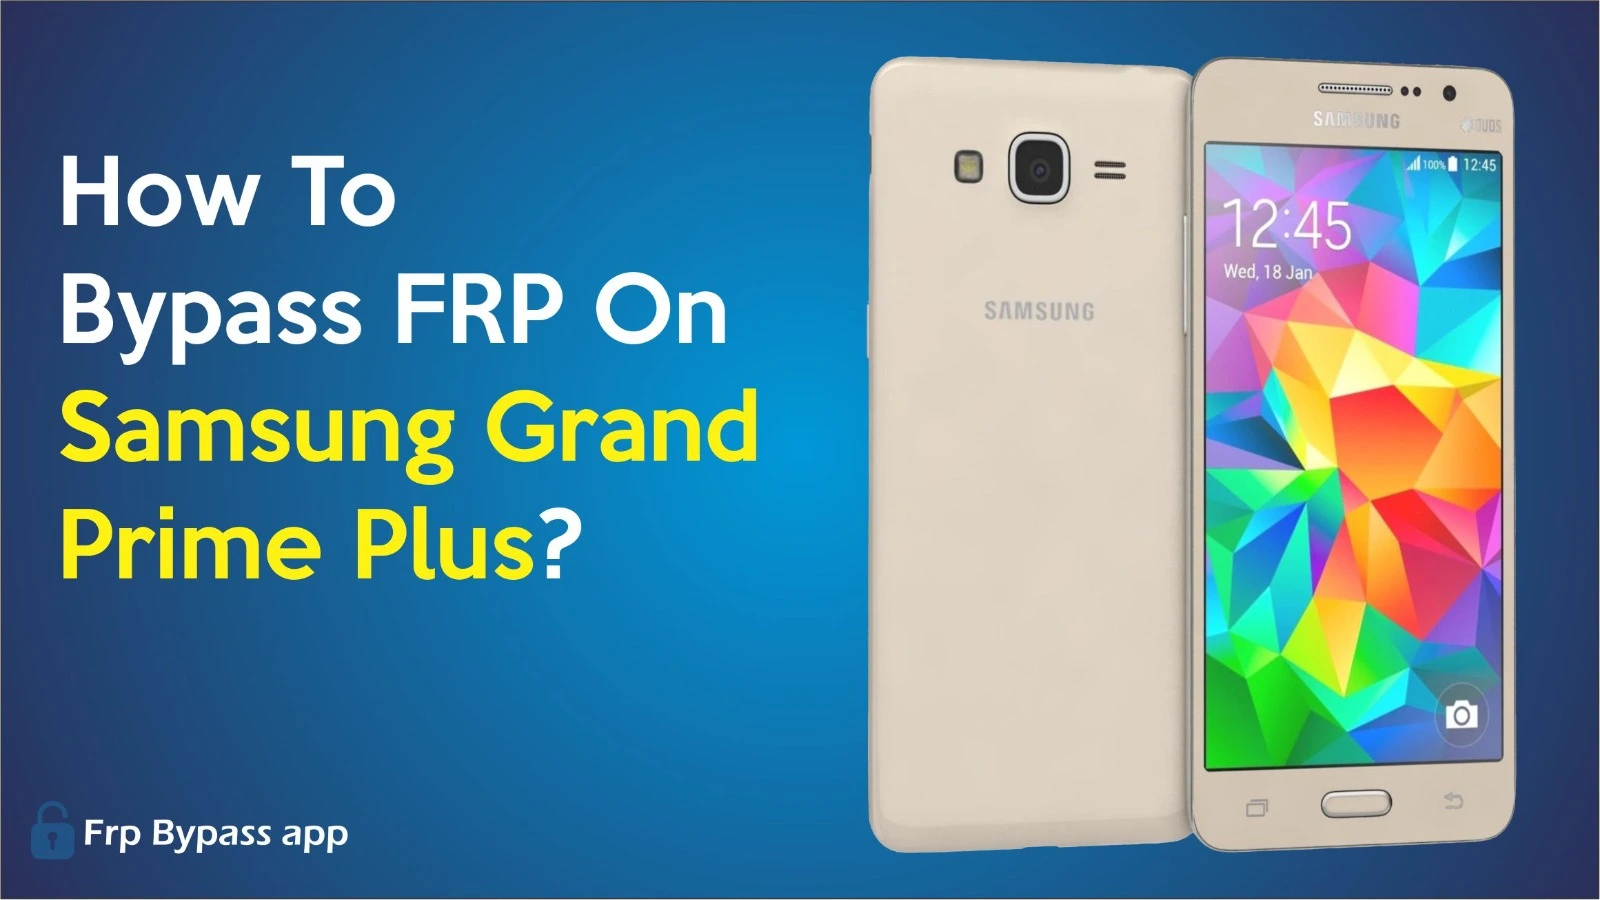 Bypass FRP On Samsung Galaxy Grand Prime Plus Image